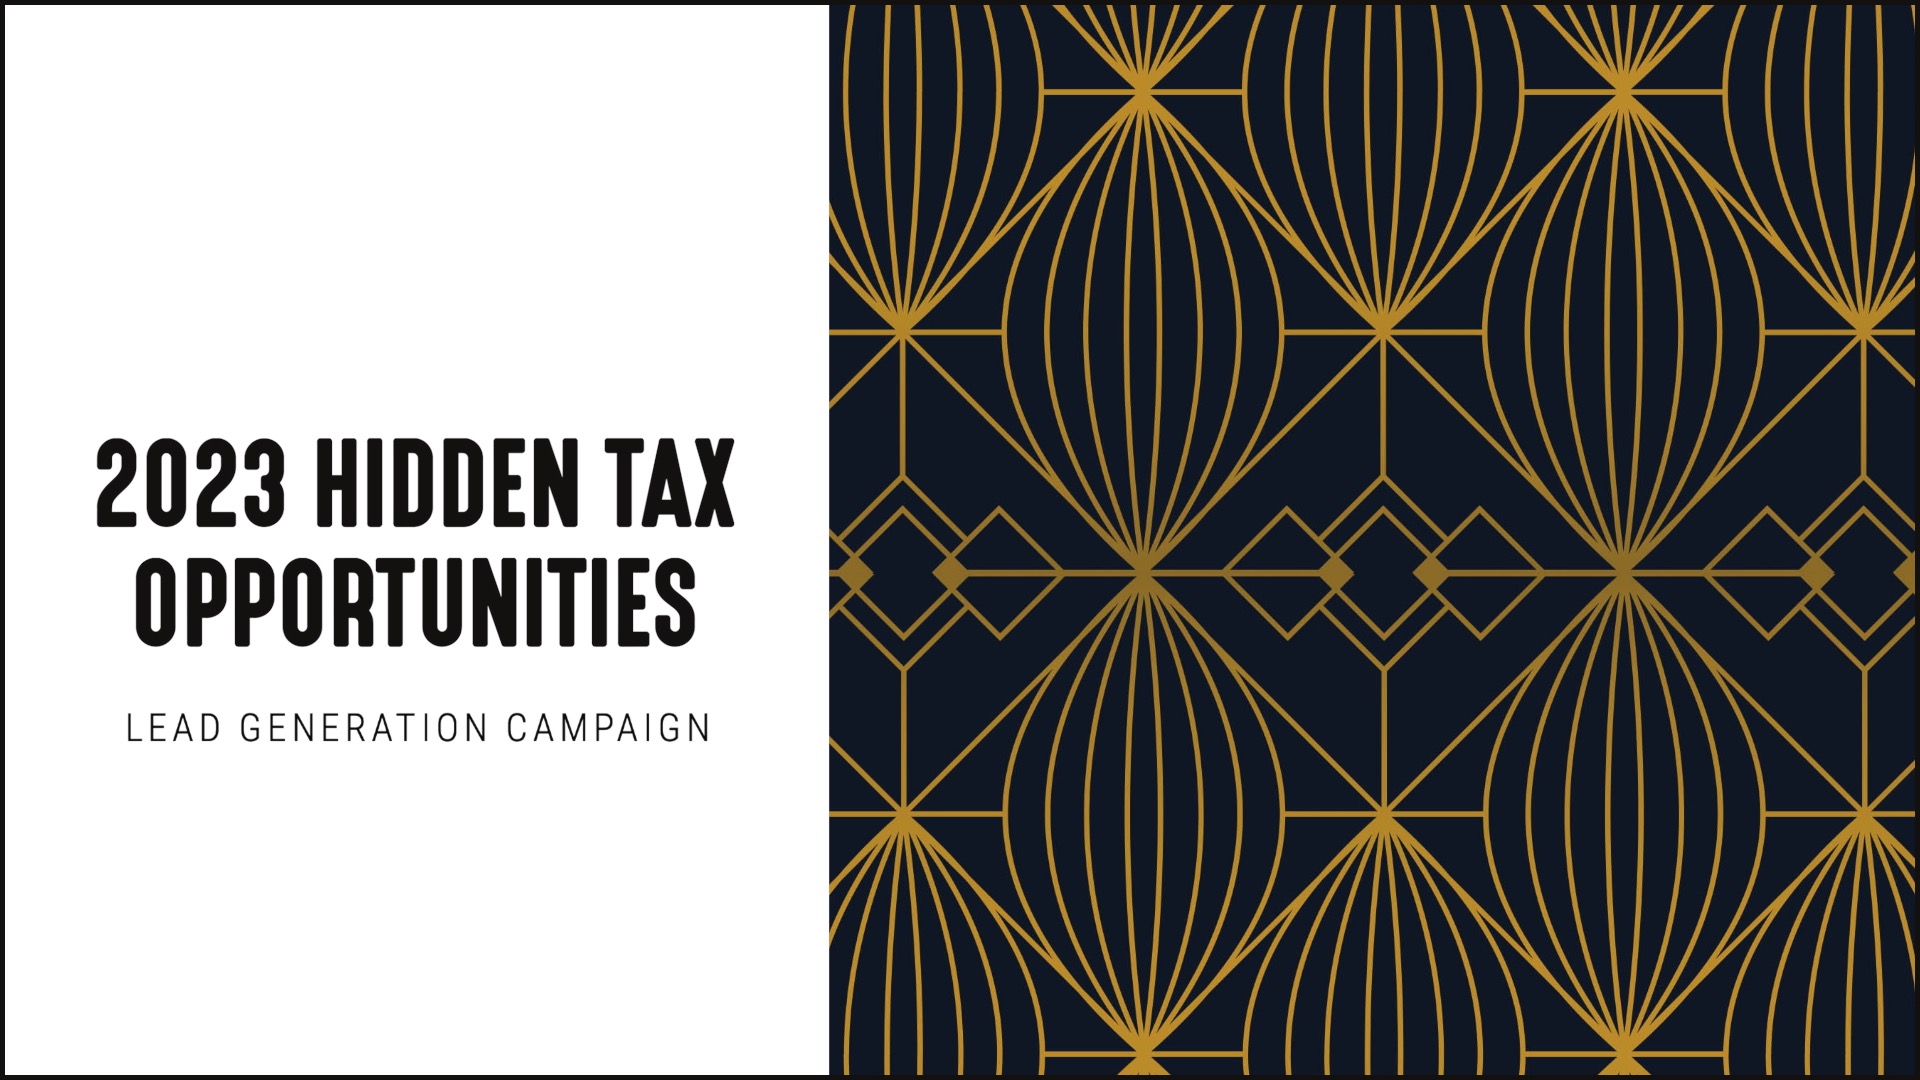 [NEW] 2023 Hidden Tax Opportunities - Lead Generation Campaign for Financial Advisors